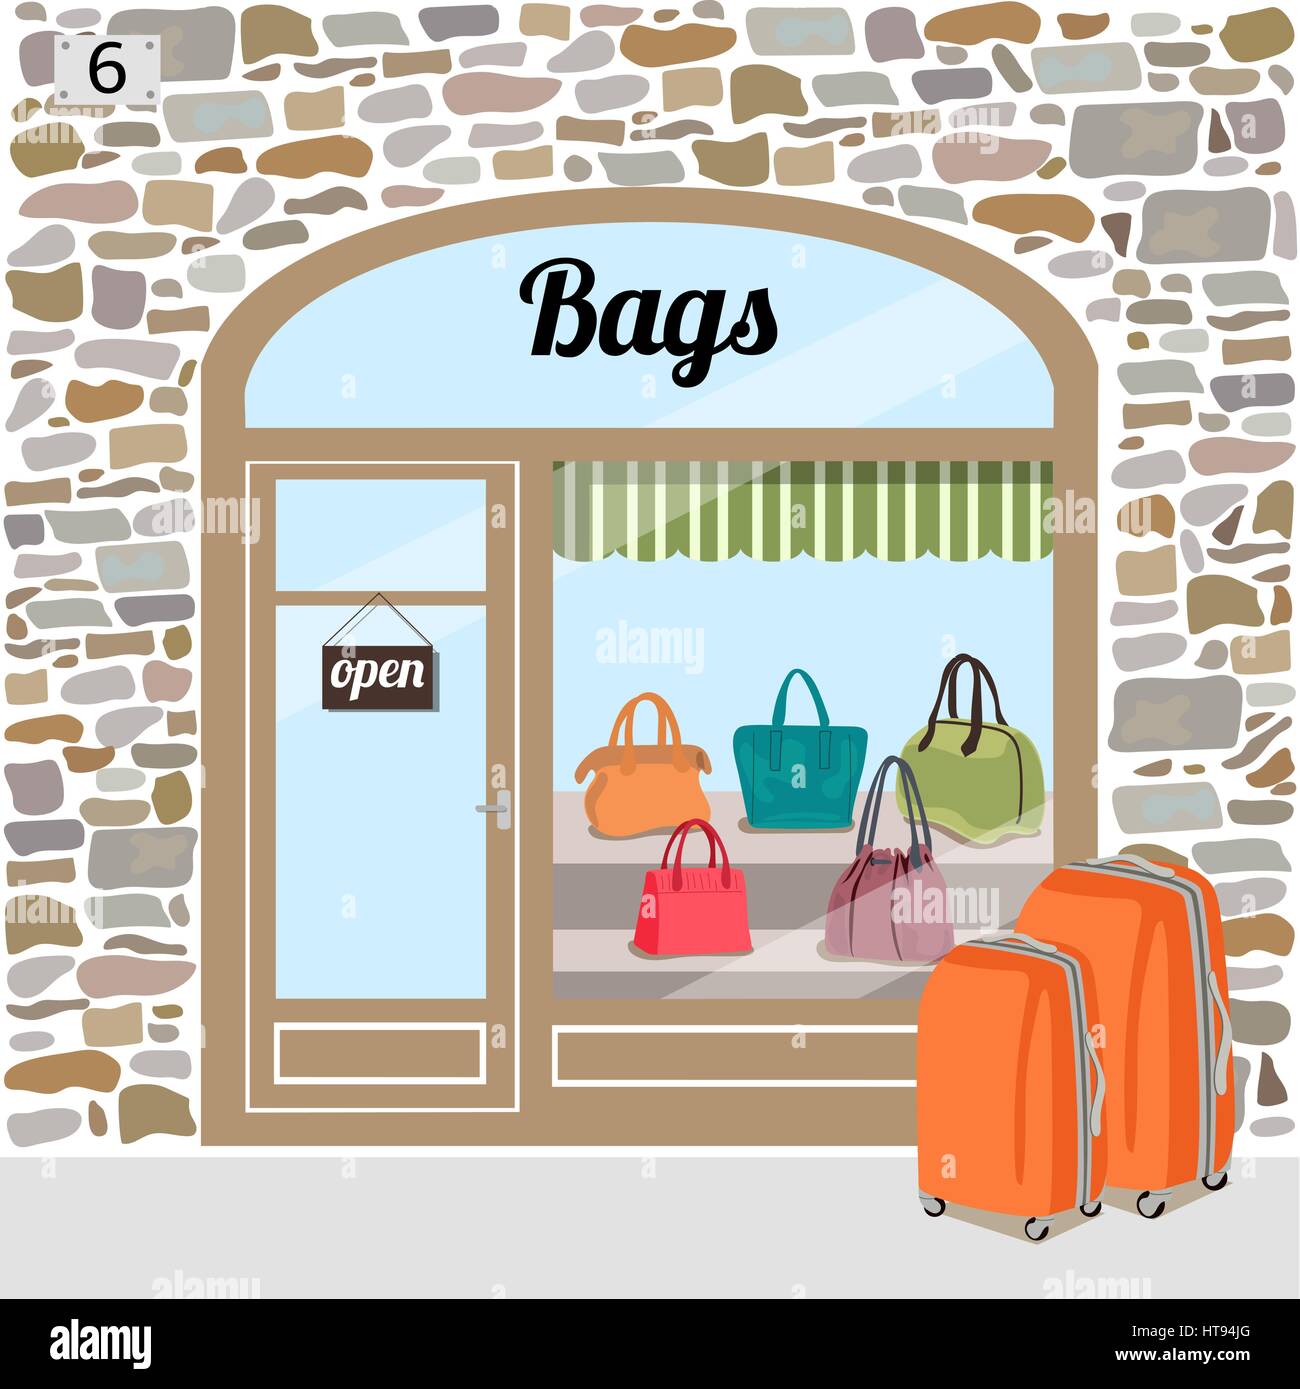 Bags shop or bags store. Stock Vector